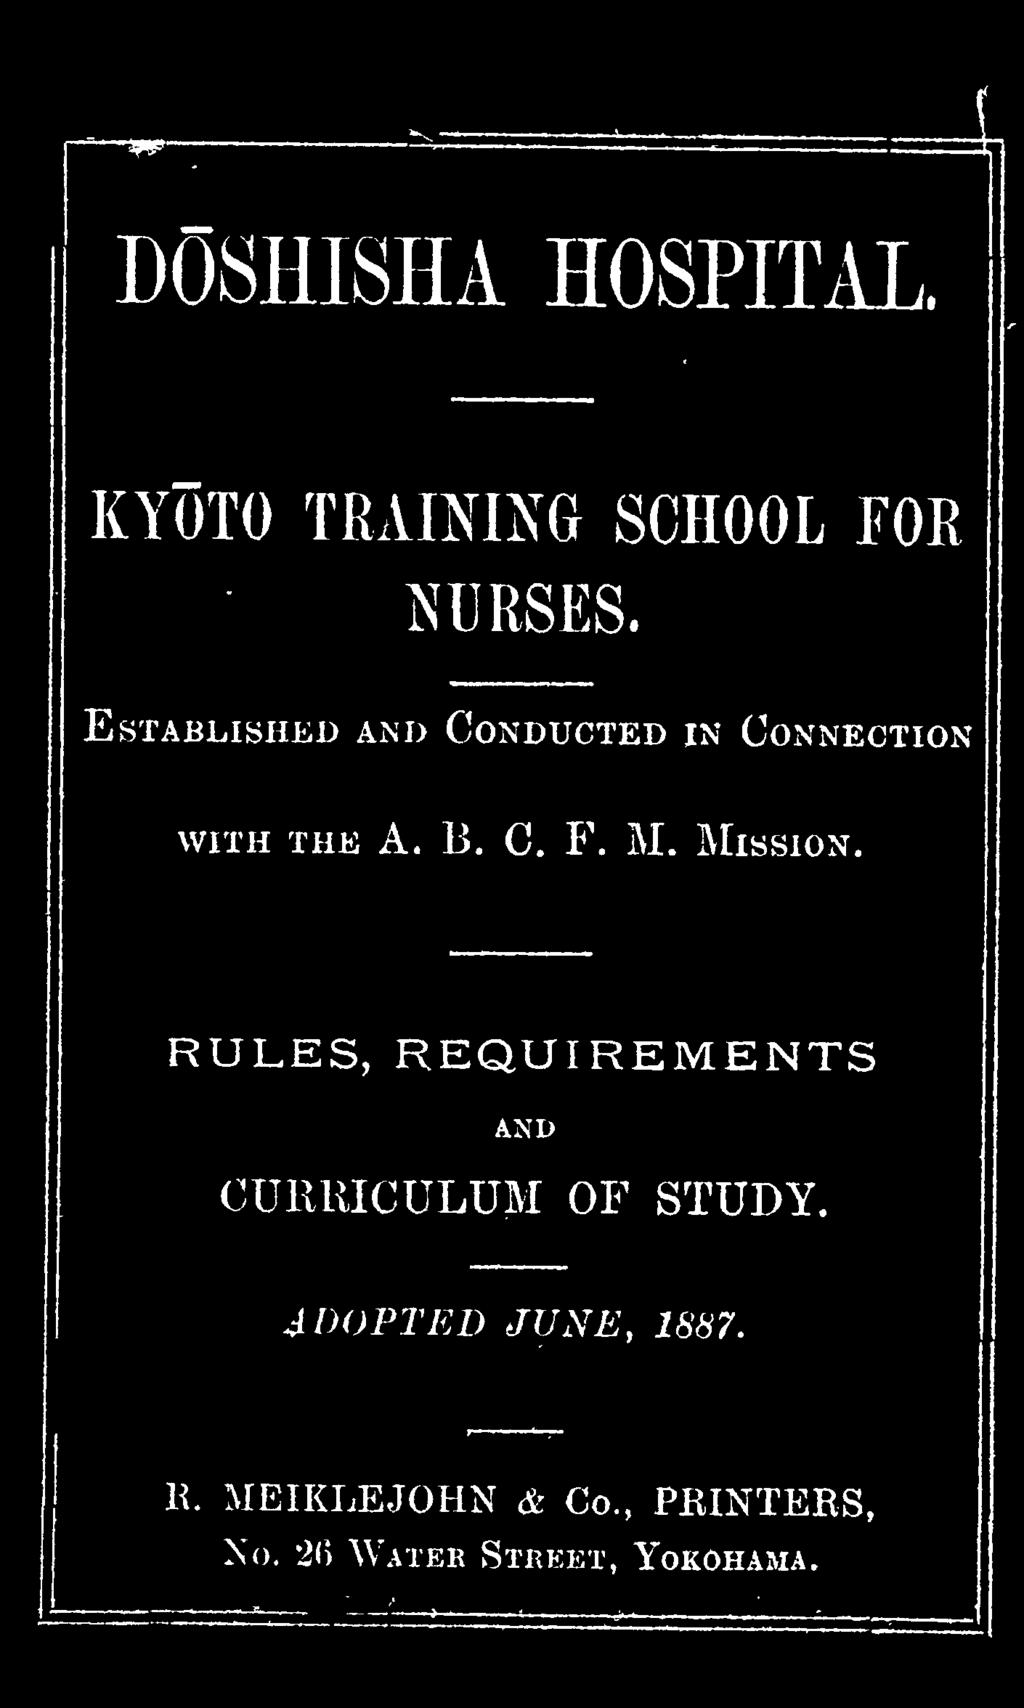 RULES, REQUIREMENTS AND CURRICULUM OF